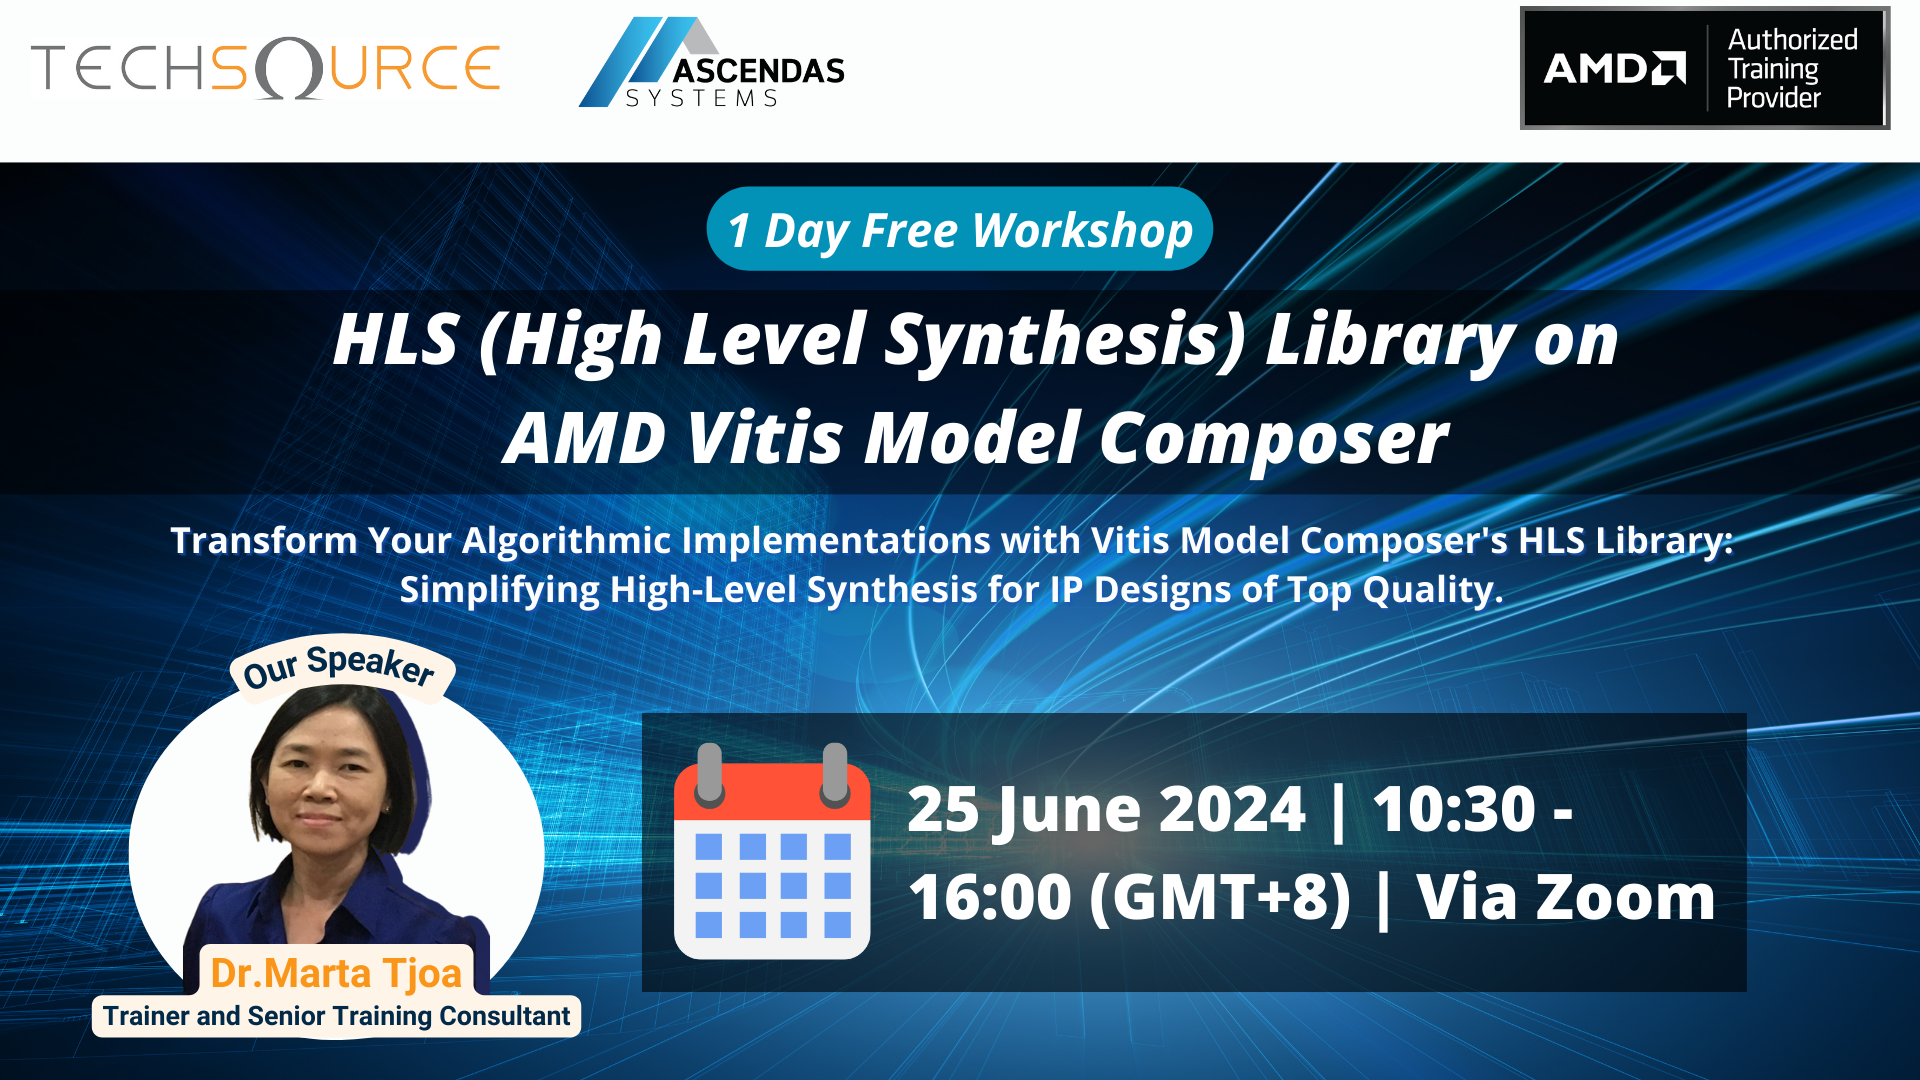 [1 Day Free Workshop] HLS (High Level Synthesis) Library on AMD Vitis Model Composer